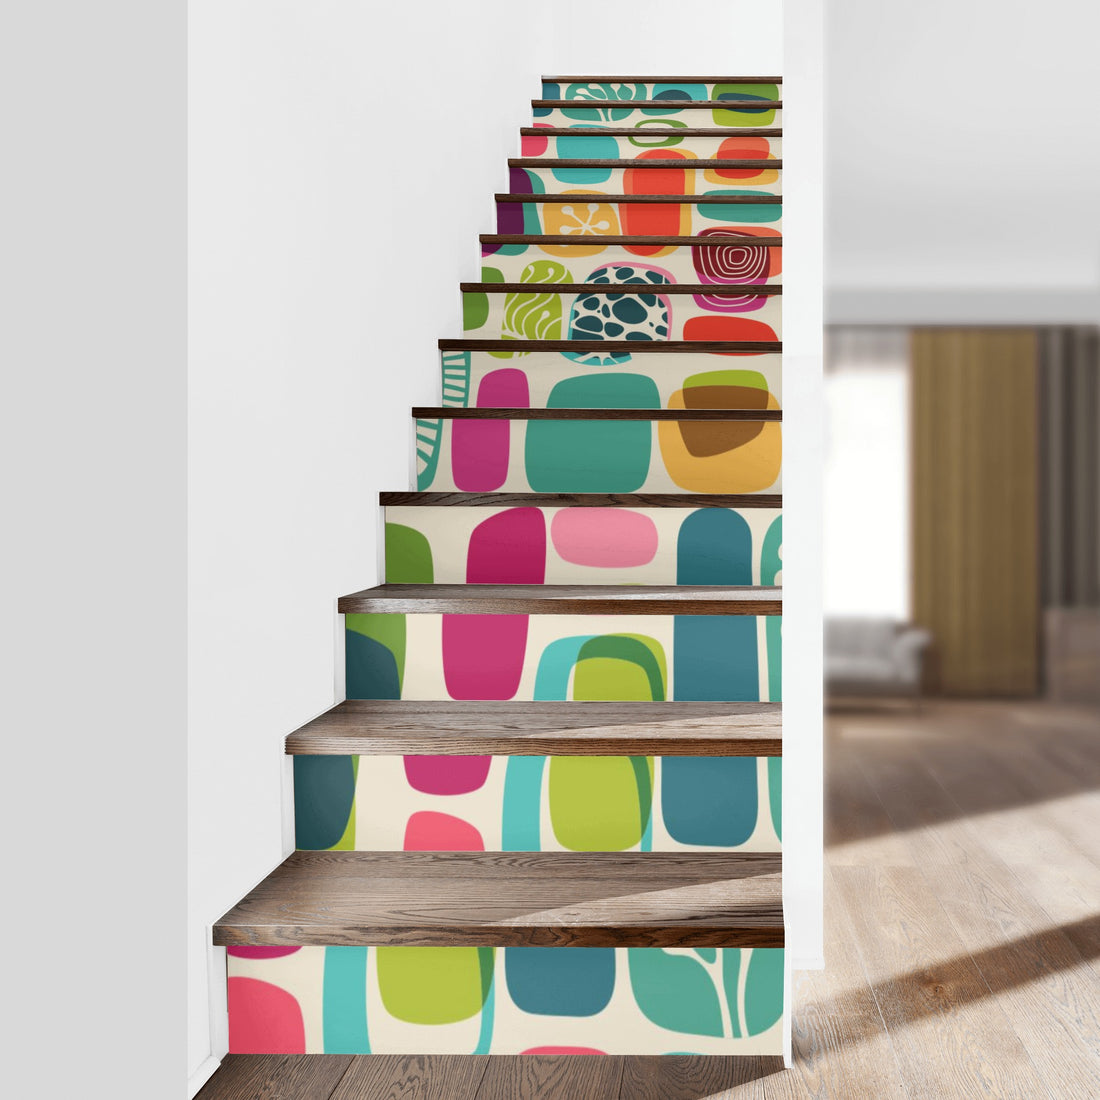 Mid Century Modern Amoeba Designed Funky Colorful Peel And Stick Stair Risers